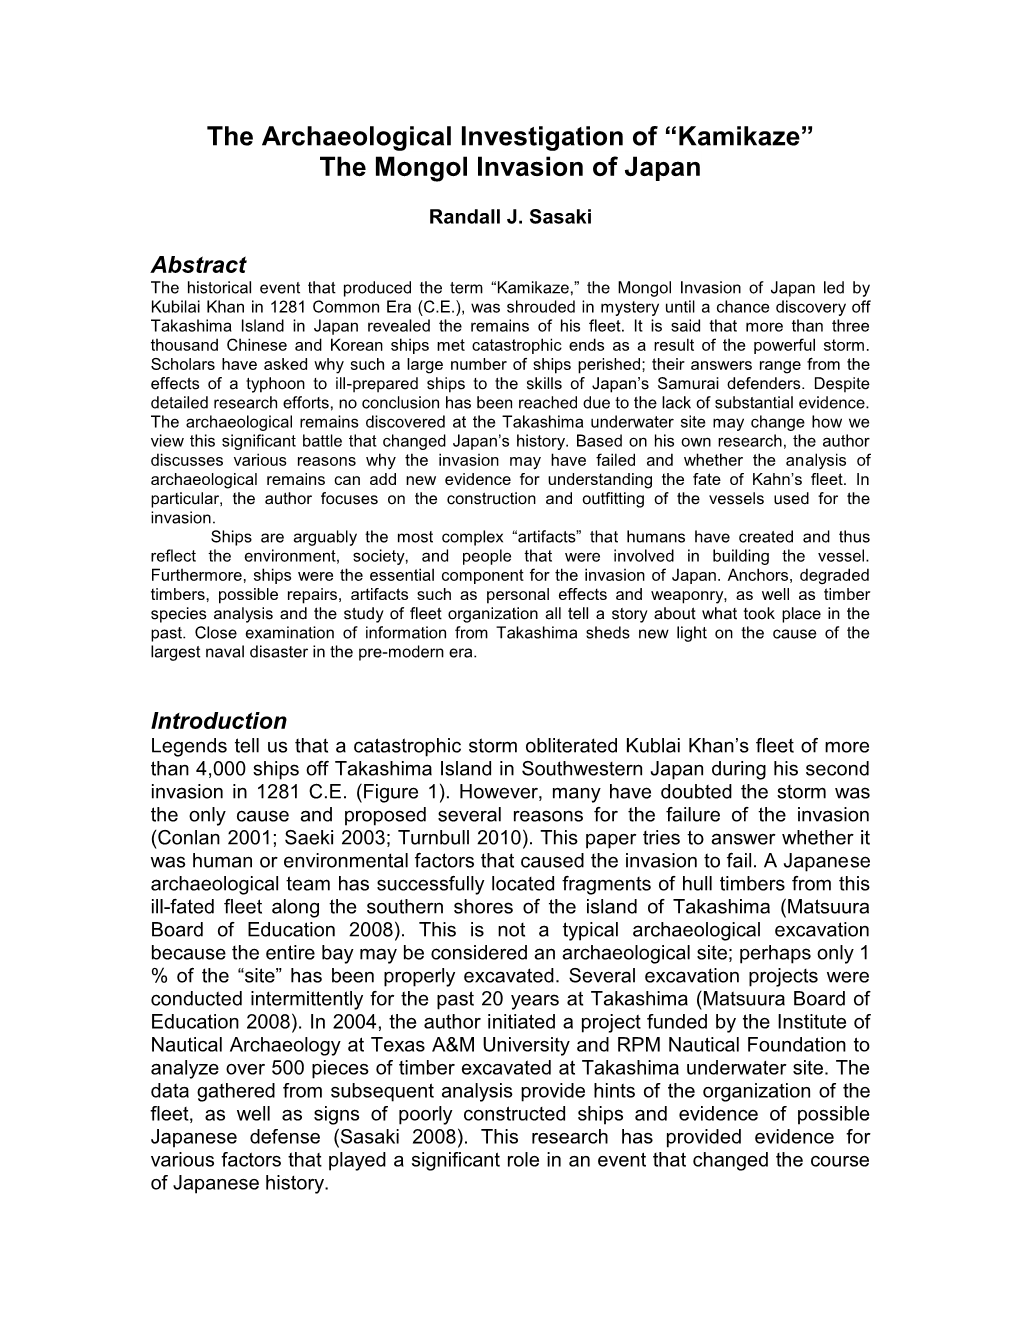 The Archaeological Investigation of “Kamikaze” the Mongol Invasion of Japan